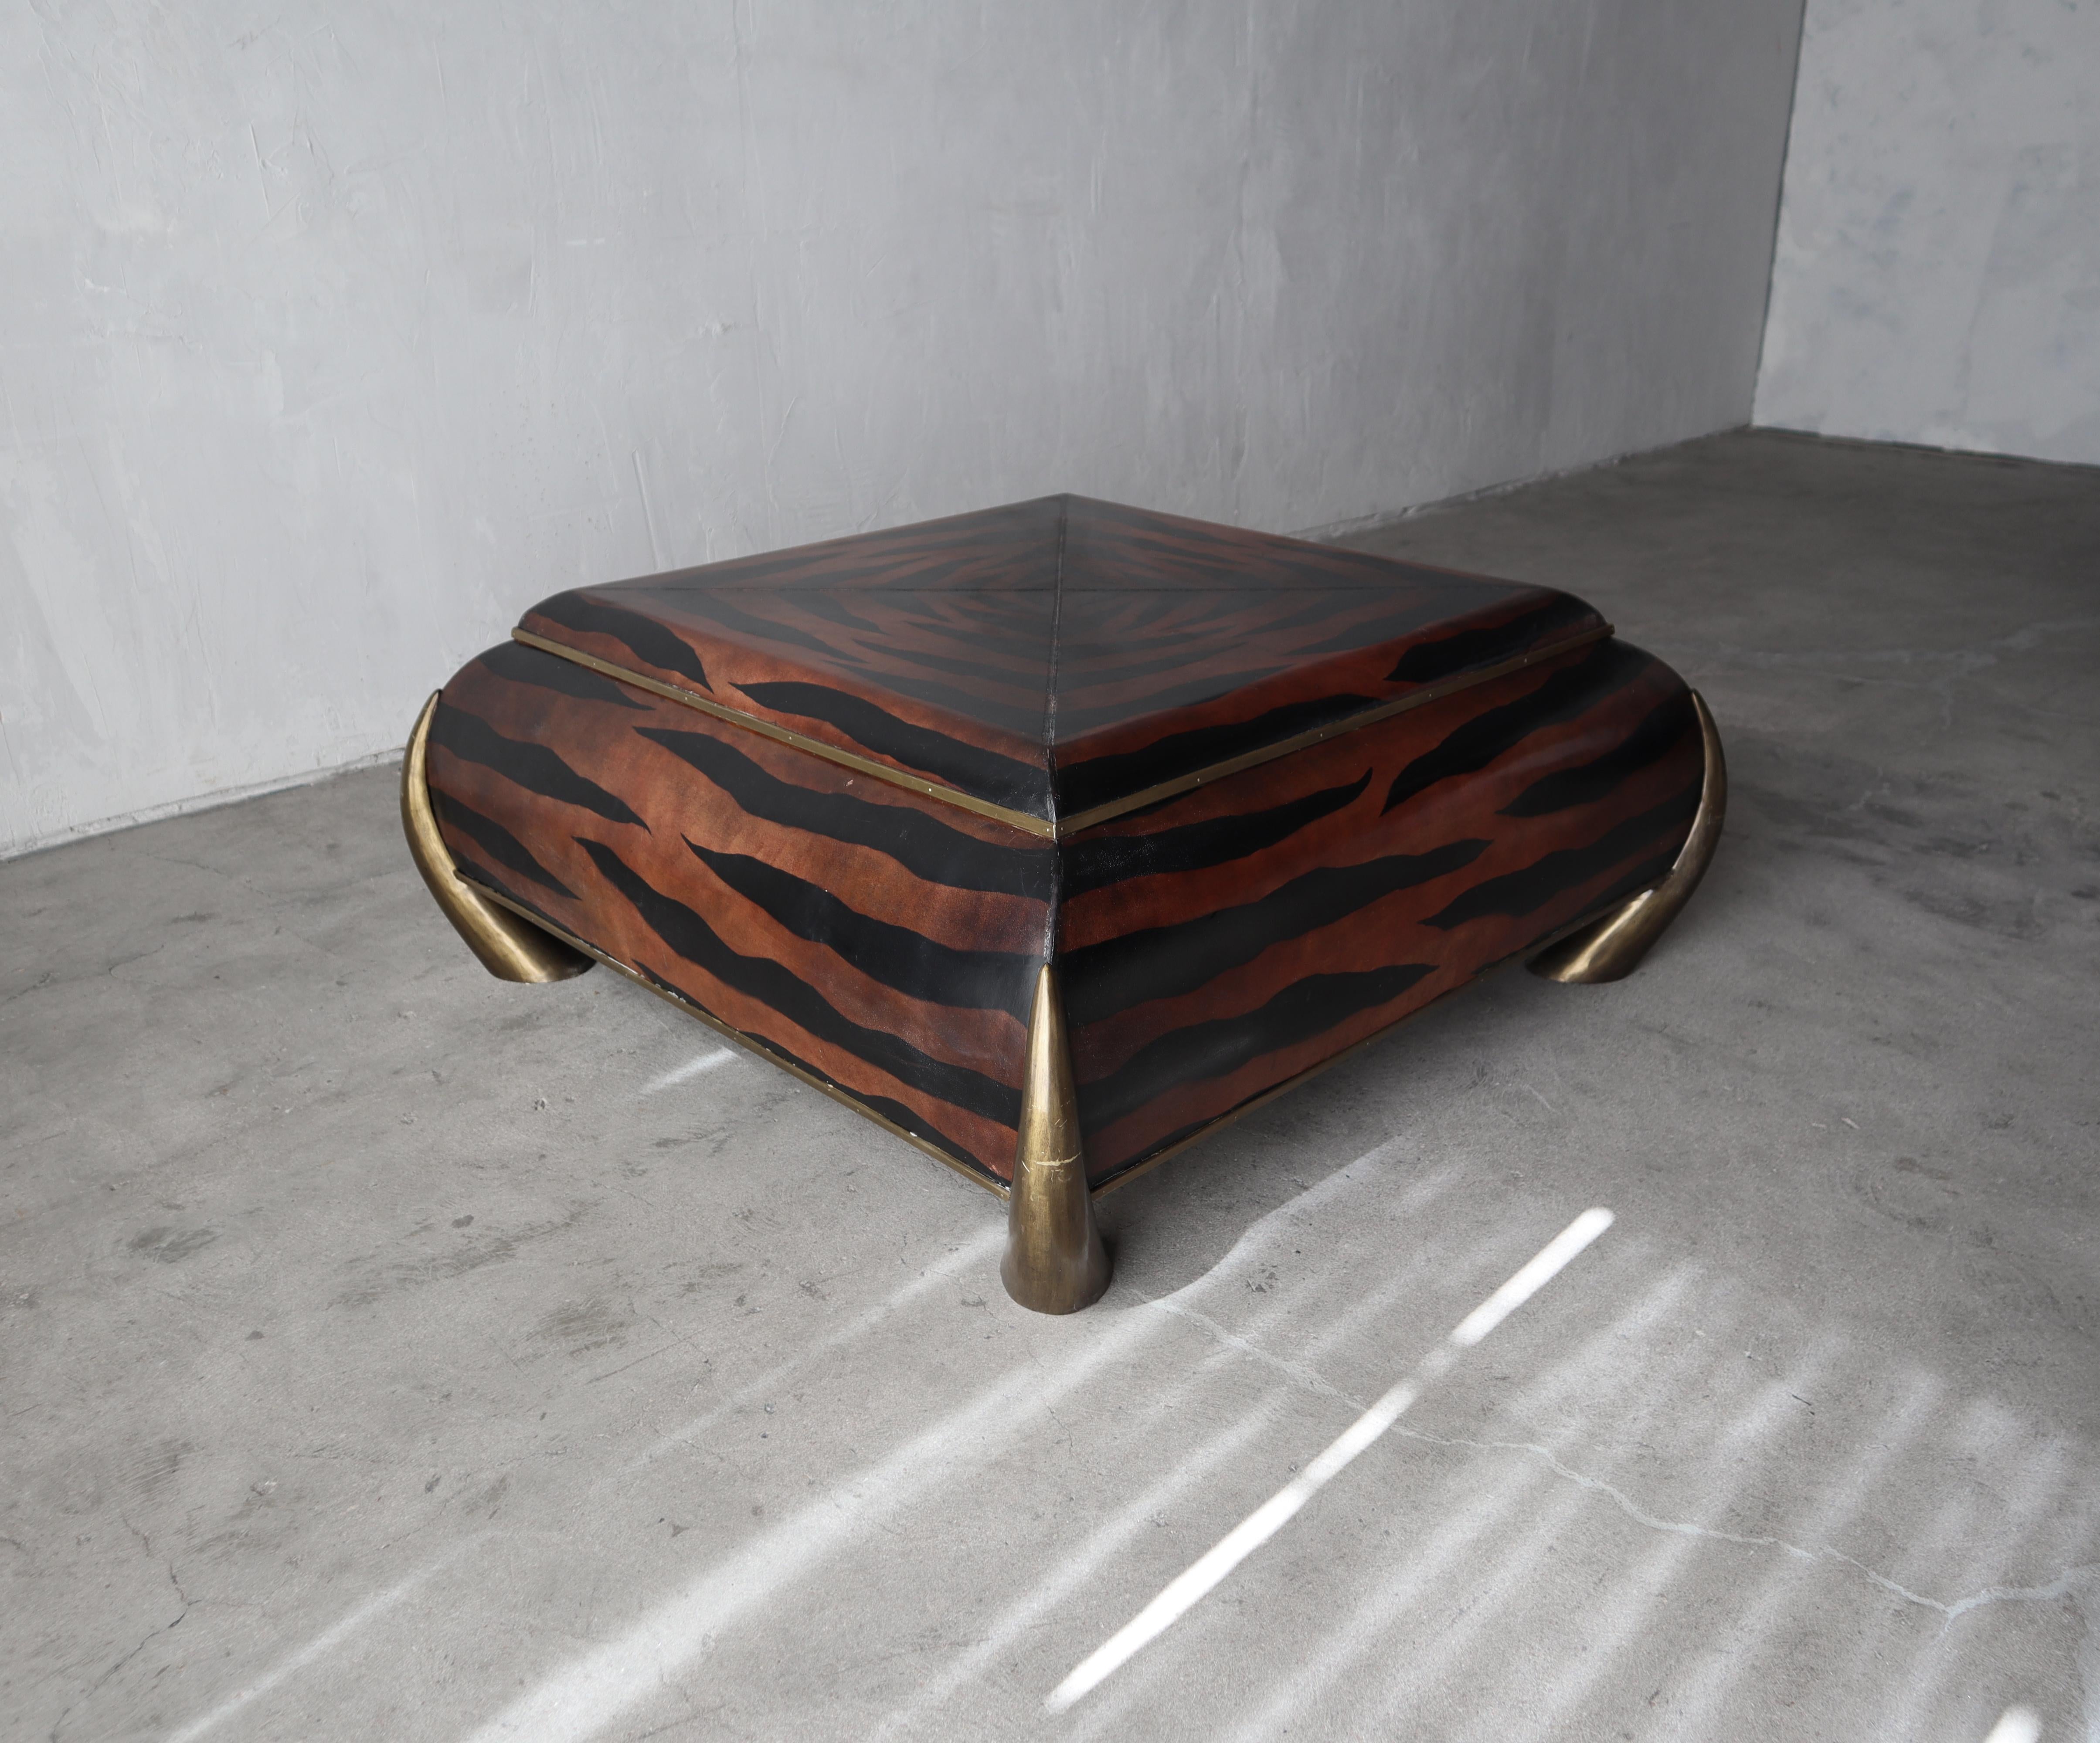 This gorgeous, leather covered coffee table is an exemplary example of Classic Maitland-Smith craftsmanship.

The coffee table is covered in leather with hand painted tiger striping, hand tooled details and super chunky, solid brass tusk legs.

The